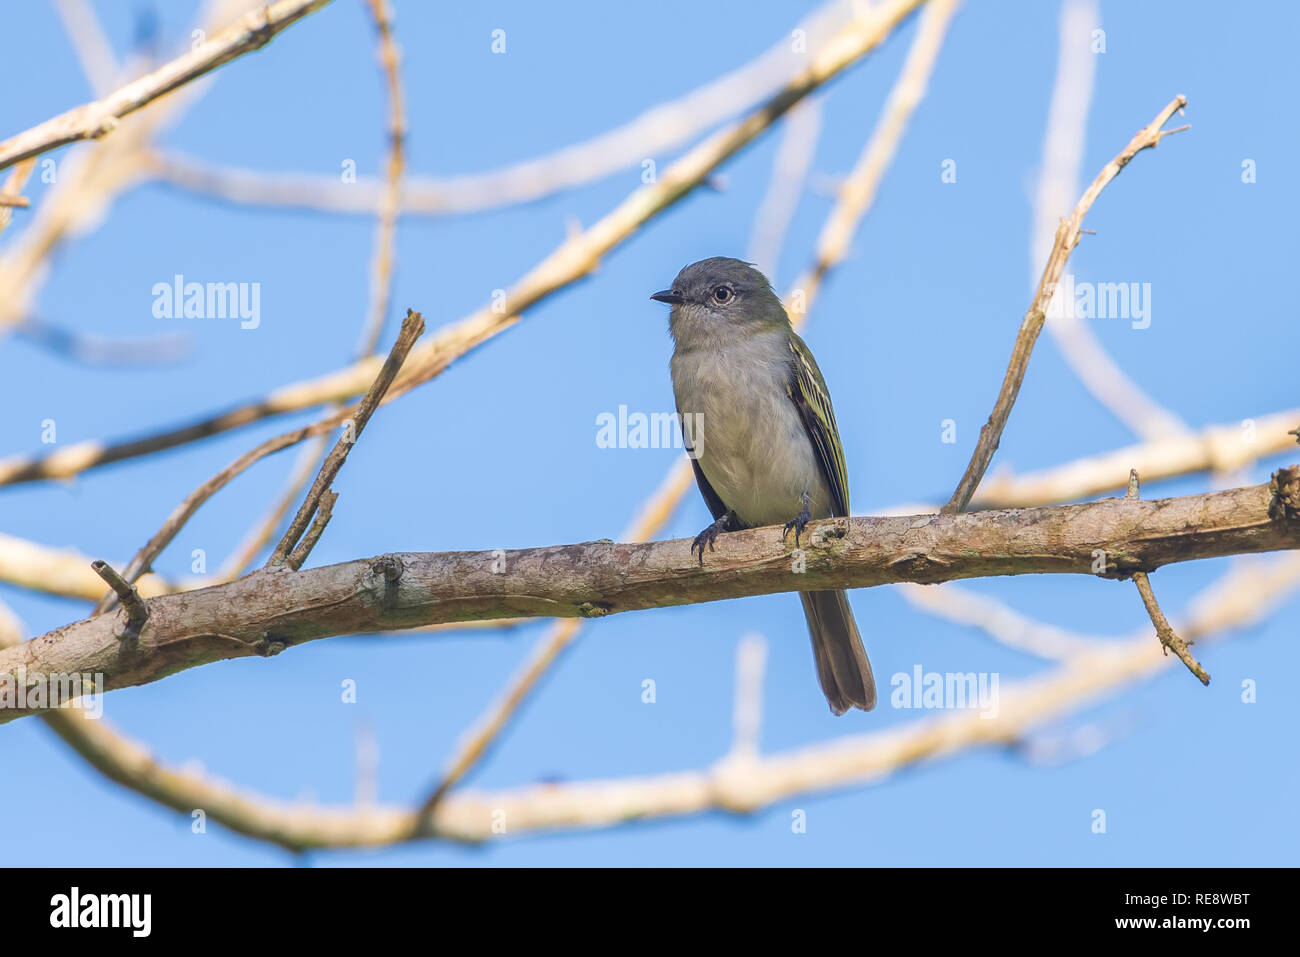 Close-up of a Gray Elaenia (Myiopagis caniceps) perched with blue sky background Stock Photo